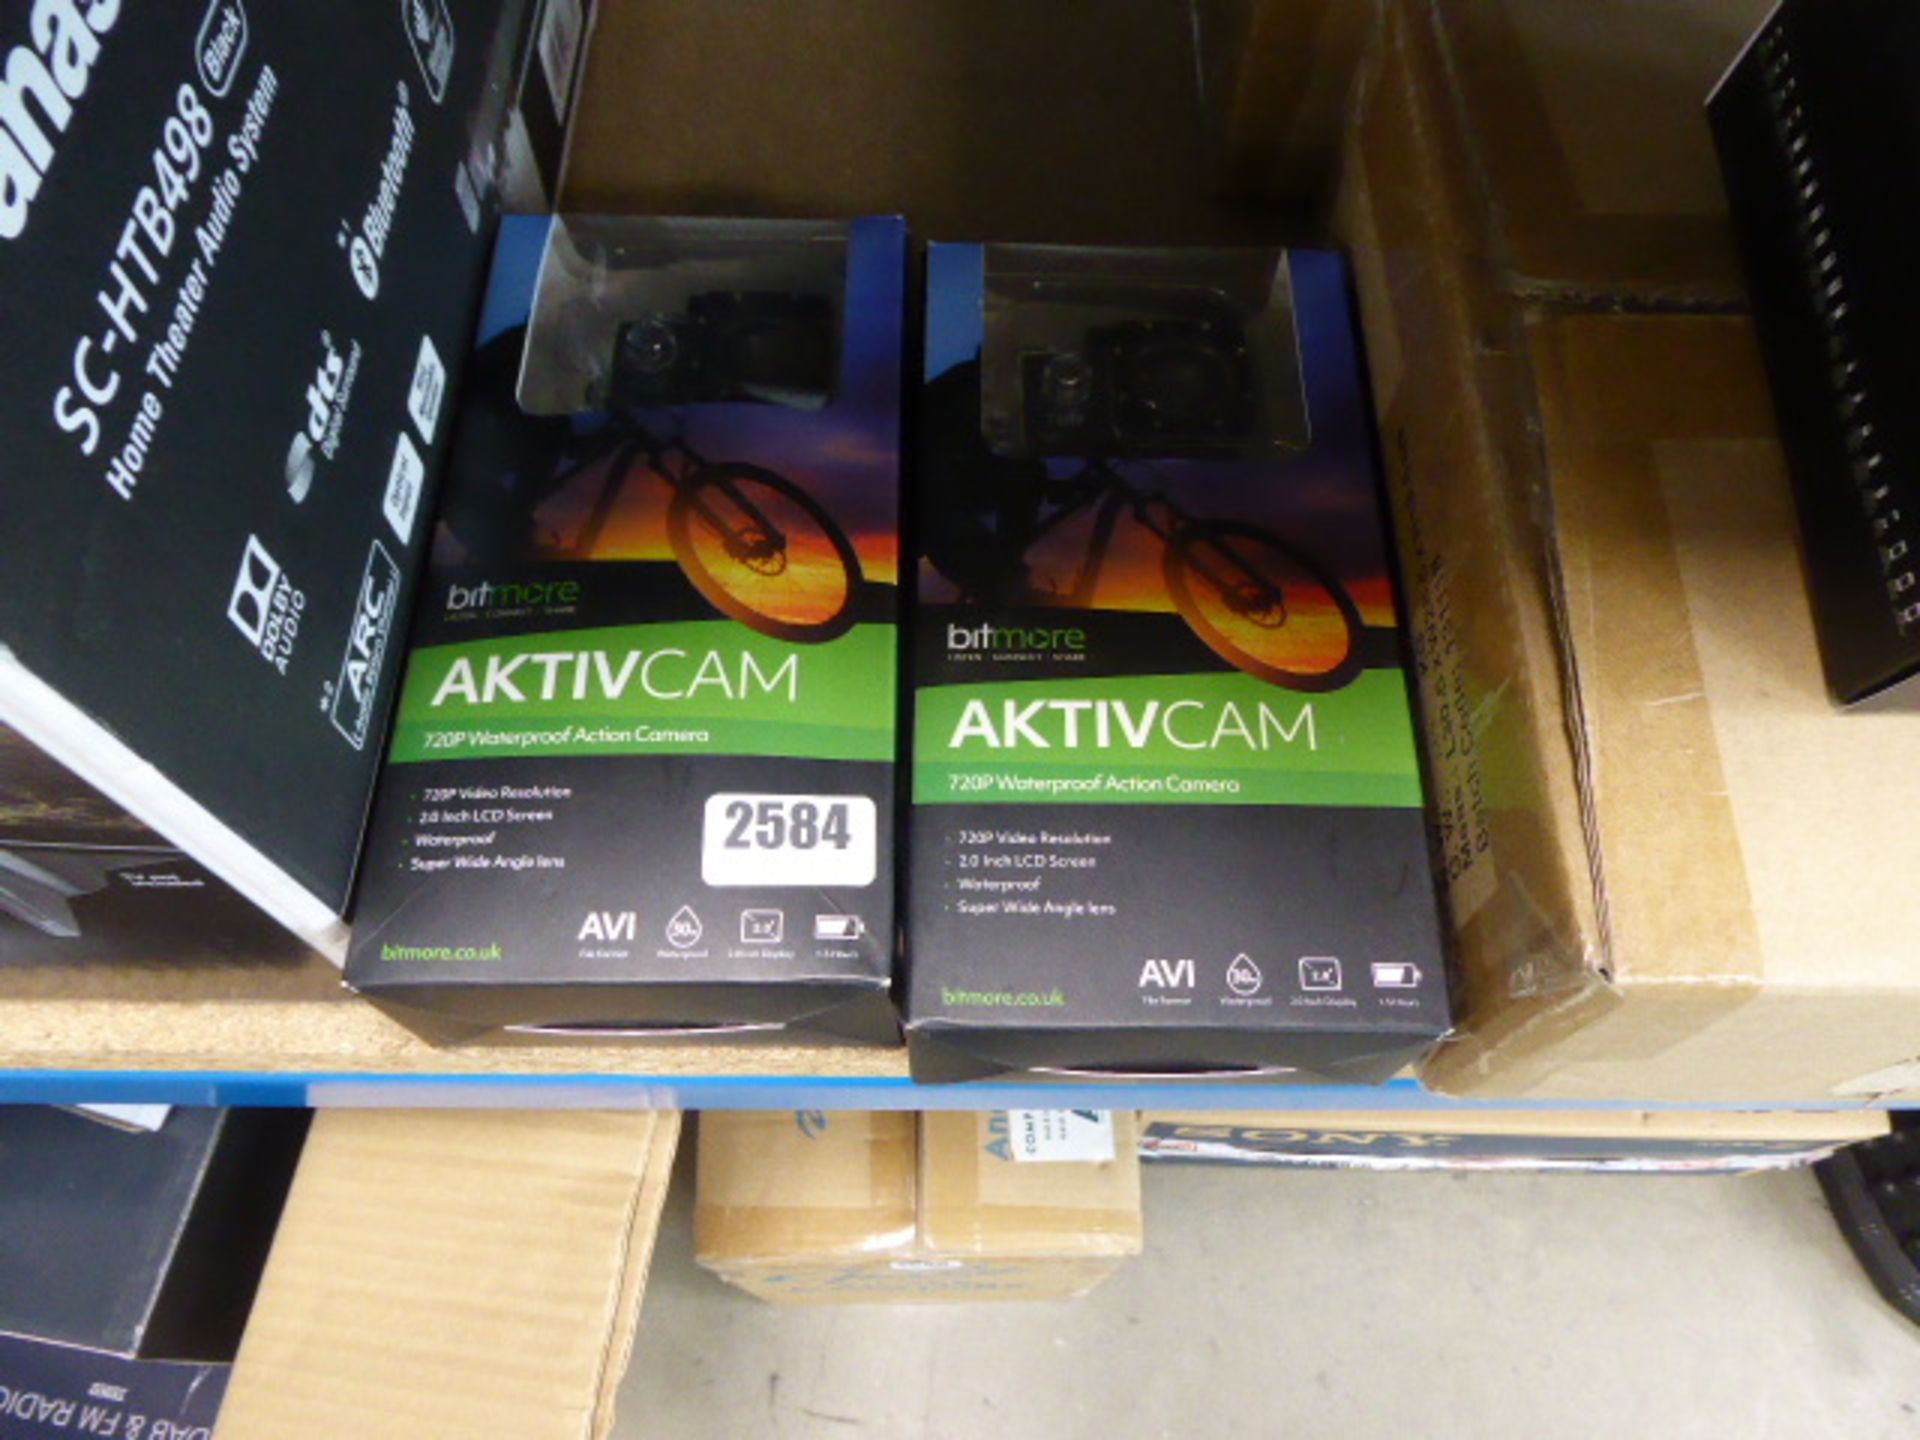 720p action cameras in boxes